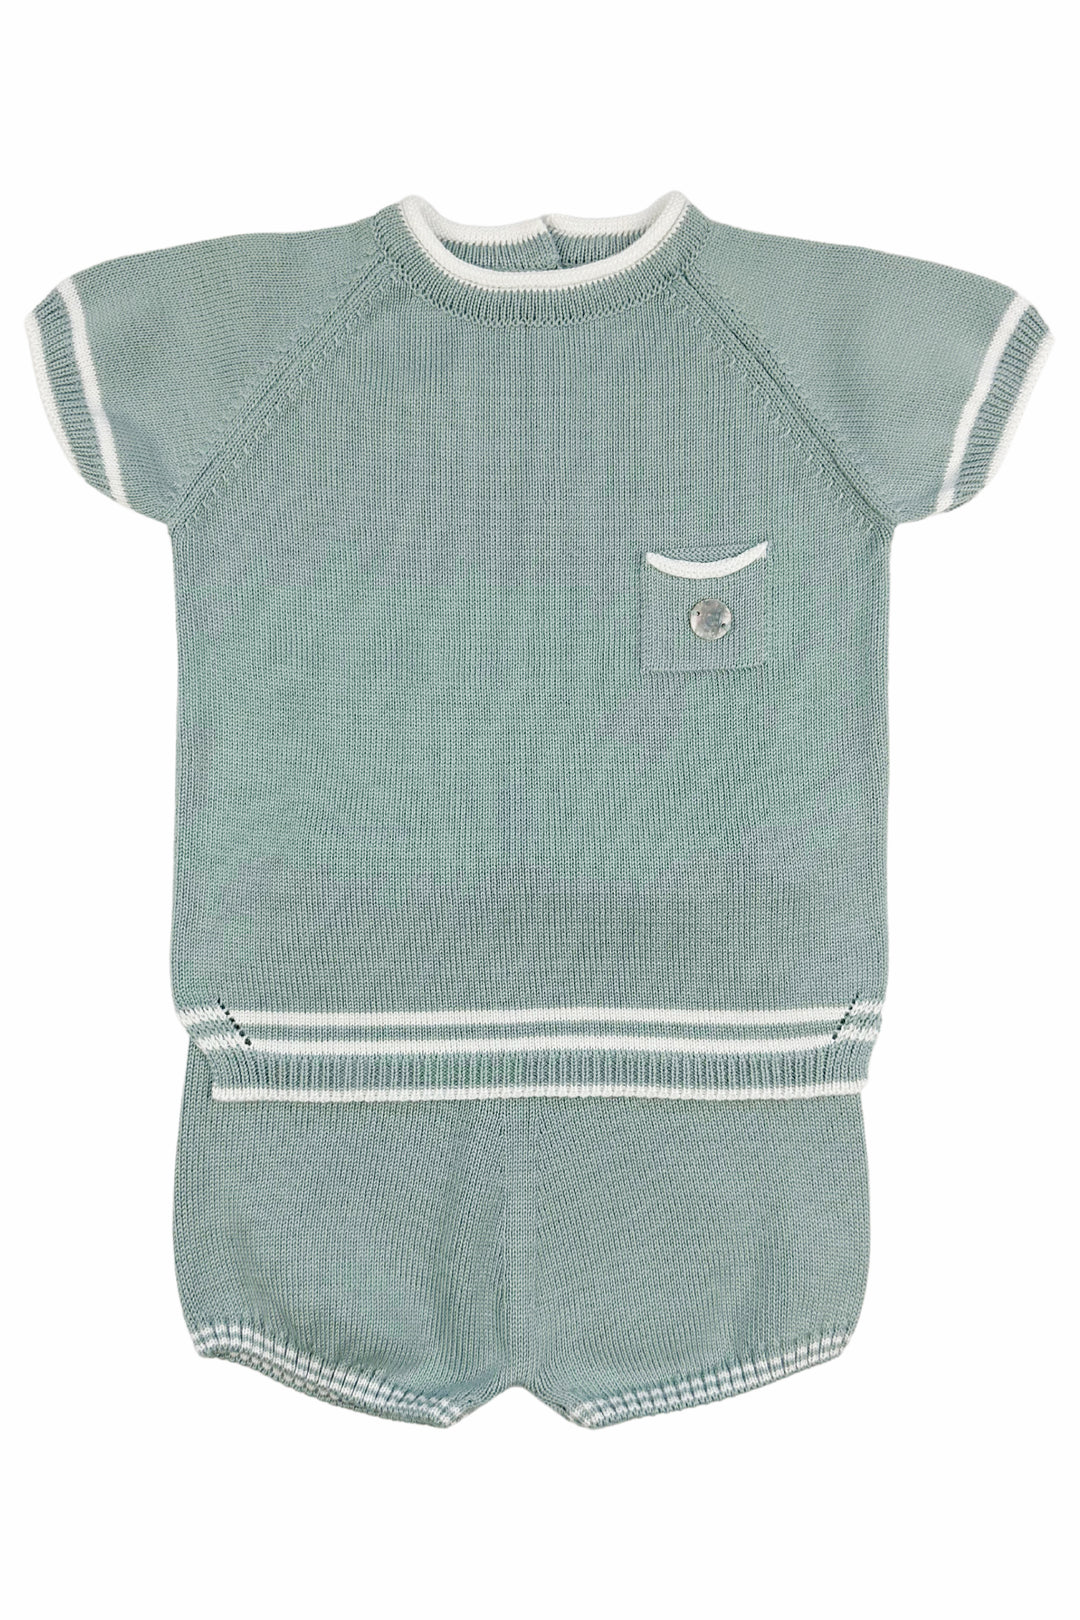 Granlei "Kylo" Teal Knit Top & Shorts | Millie and John